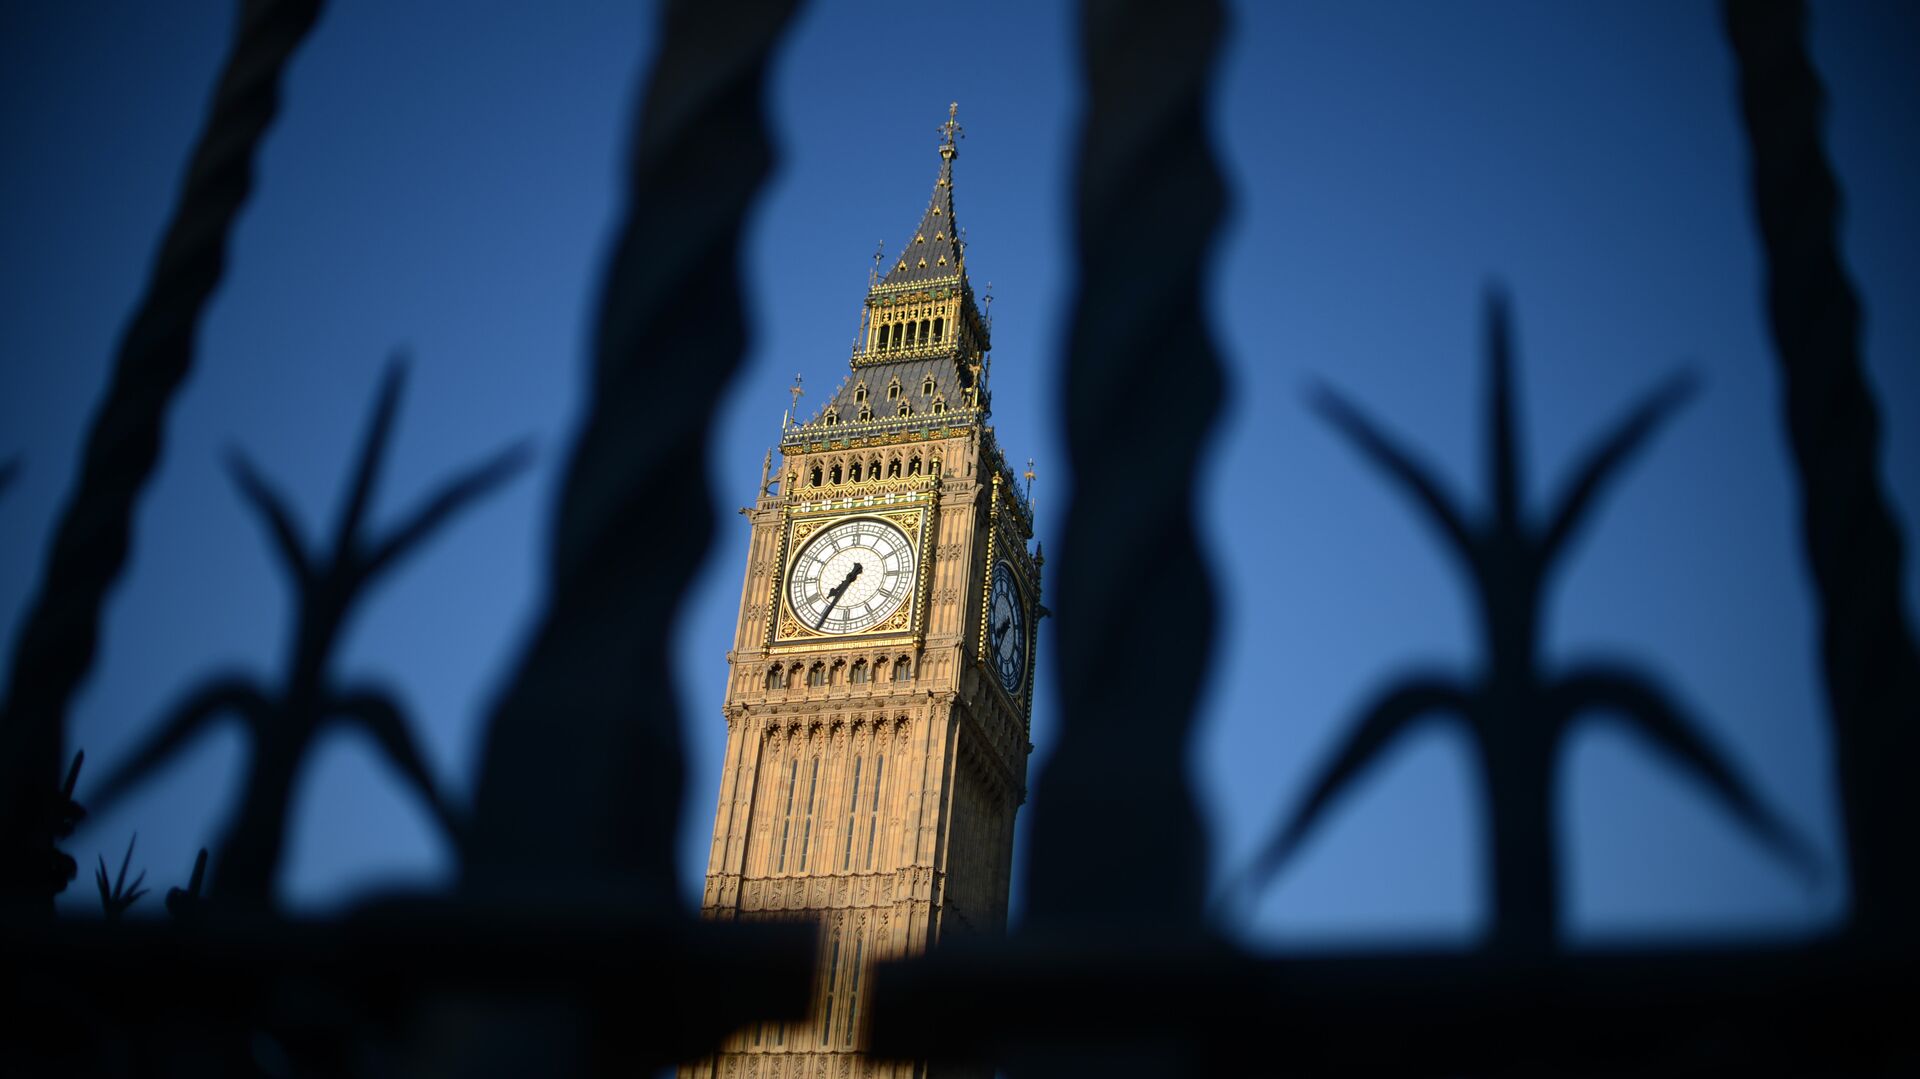 The Big Ben clock Tower is pictured in central London on July 22, 2012, five days before the start of the London 2012 Olympic Games. - Sputnik Mundo, 1920, 29.11.2021